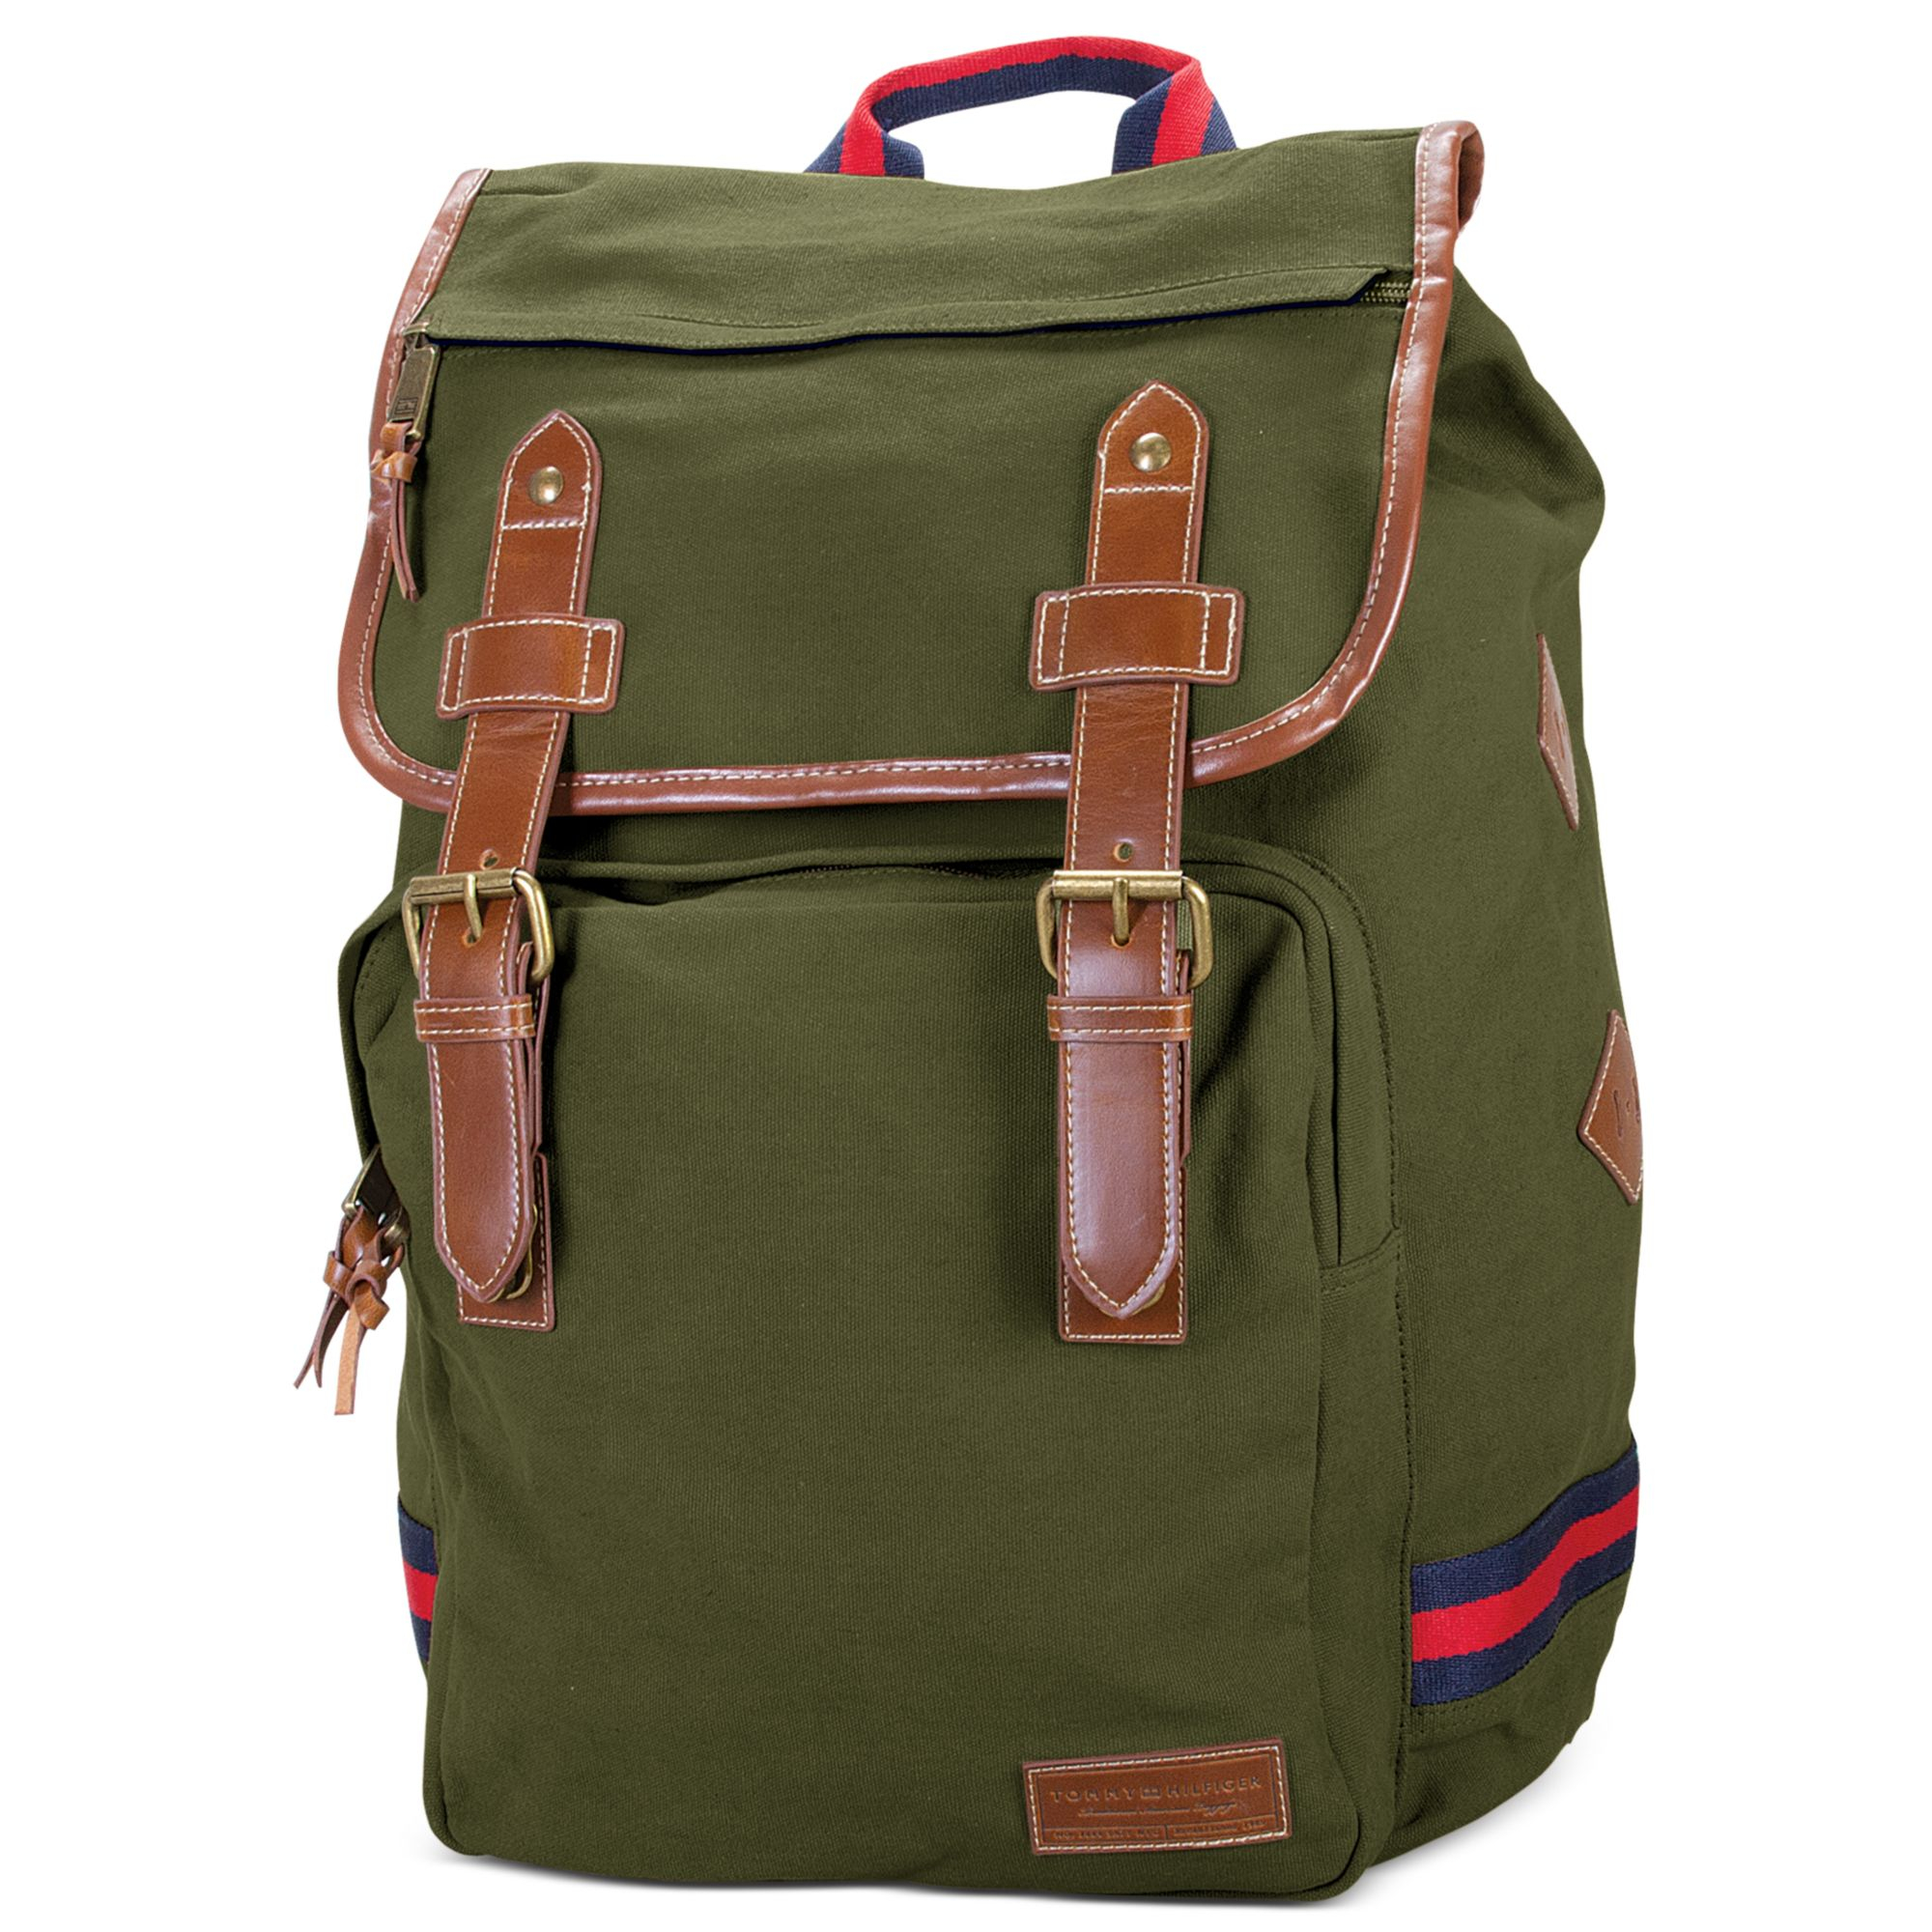 Lyst - Tommy Hilfiger Canvas Backpack in Green for Men